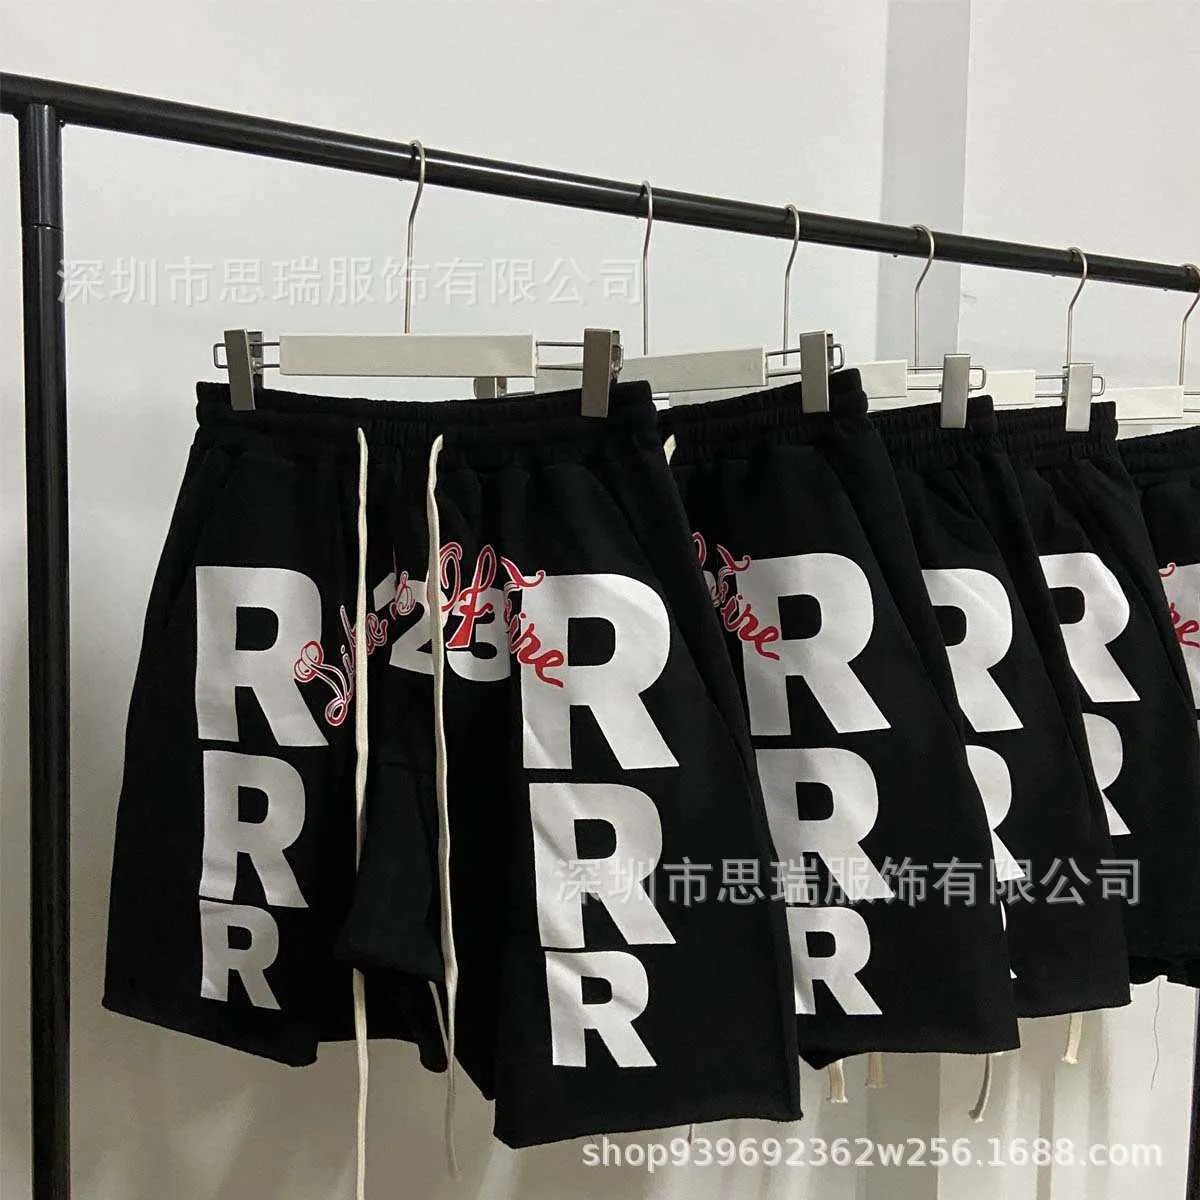 24ss Men's Shorts Niche RRR123 American high street terry summer new large R front and rear printed trendy mens 5-point shorts